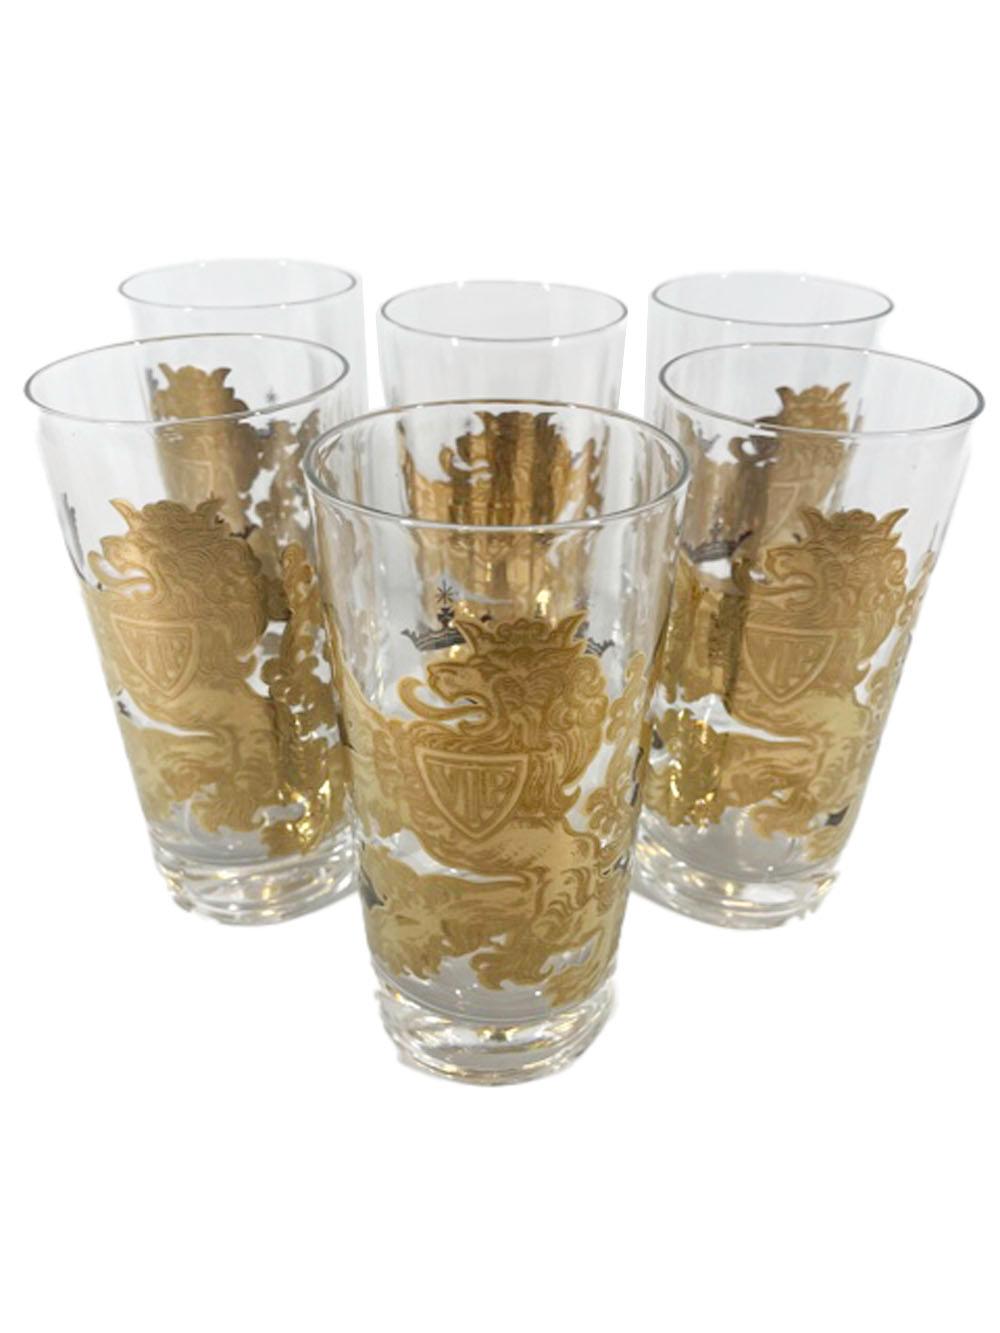 Six vintage highball glasses by Gay Fad, with a large embossed 22 karat gold rampant lion wearing a crown and holding a shield with the letters VIP embossed on it.